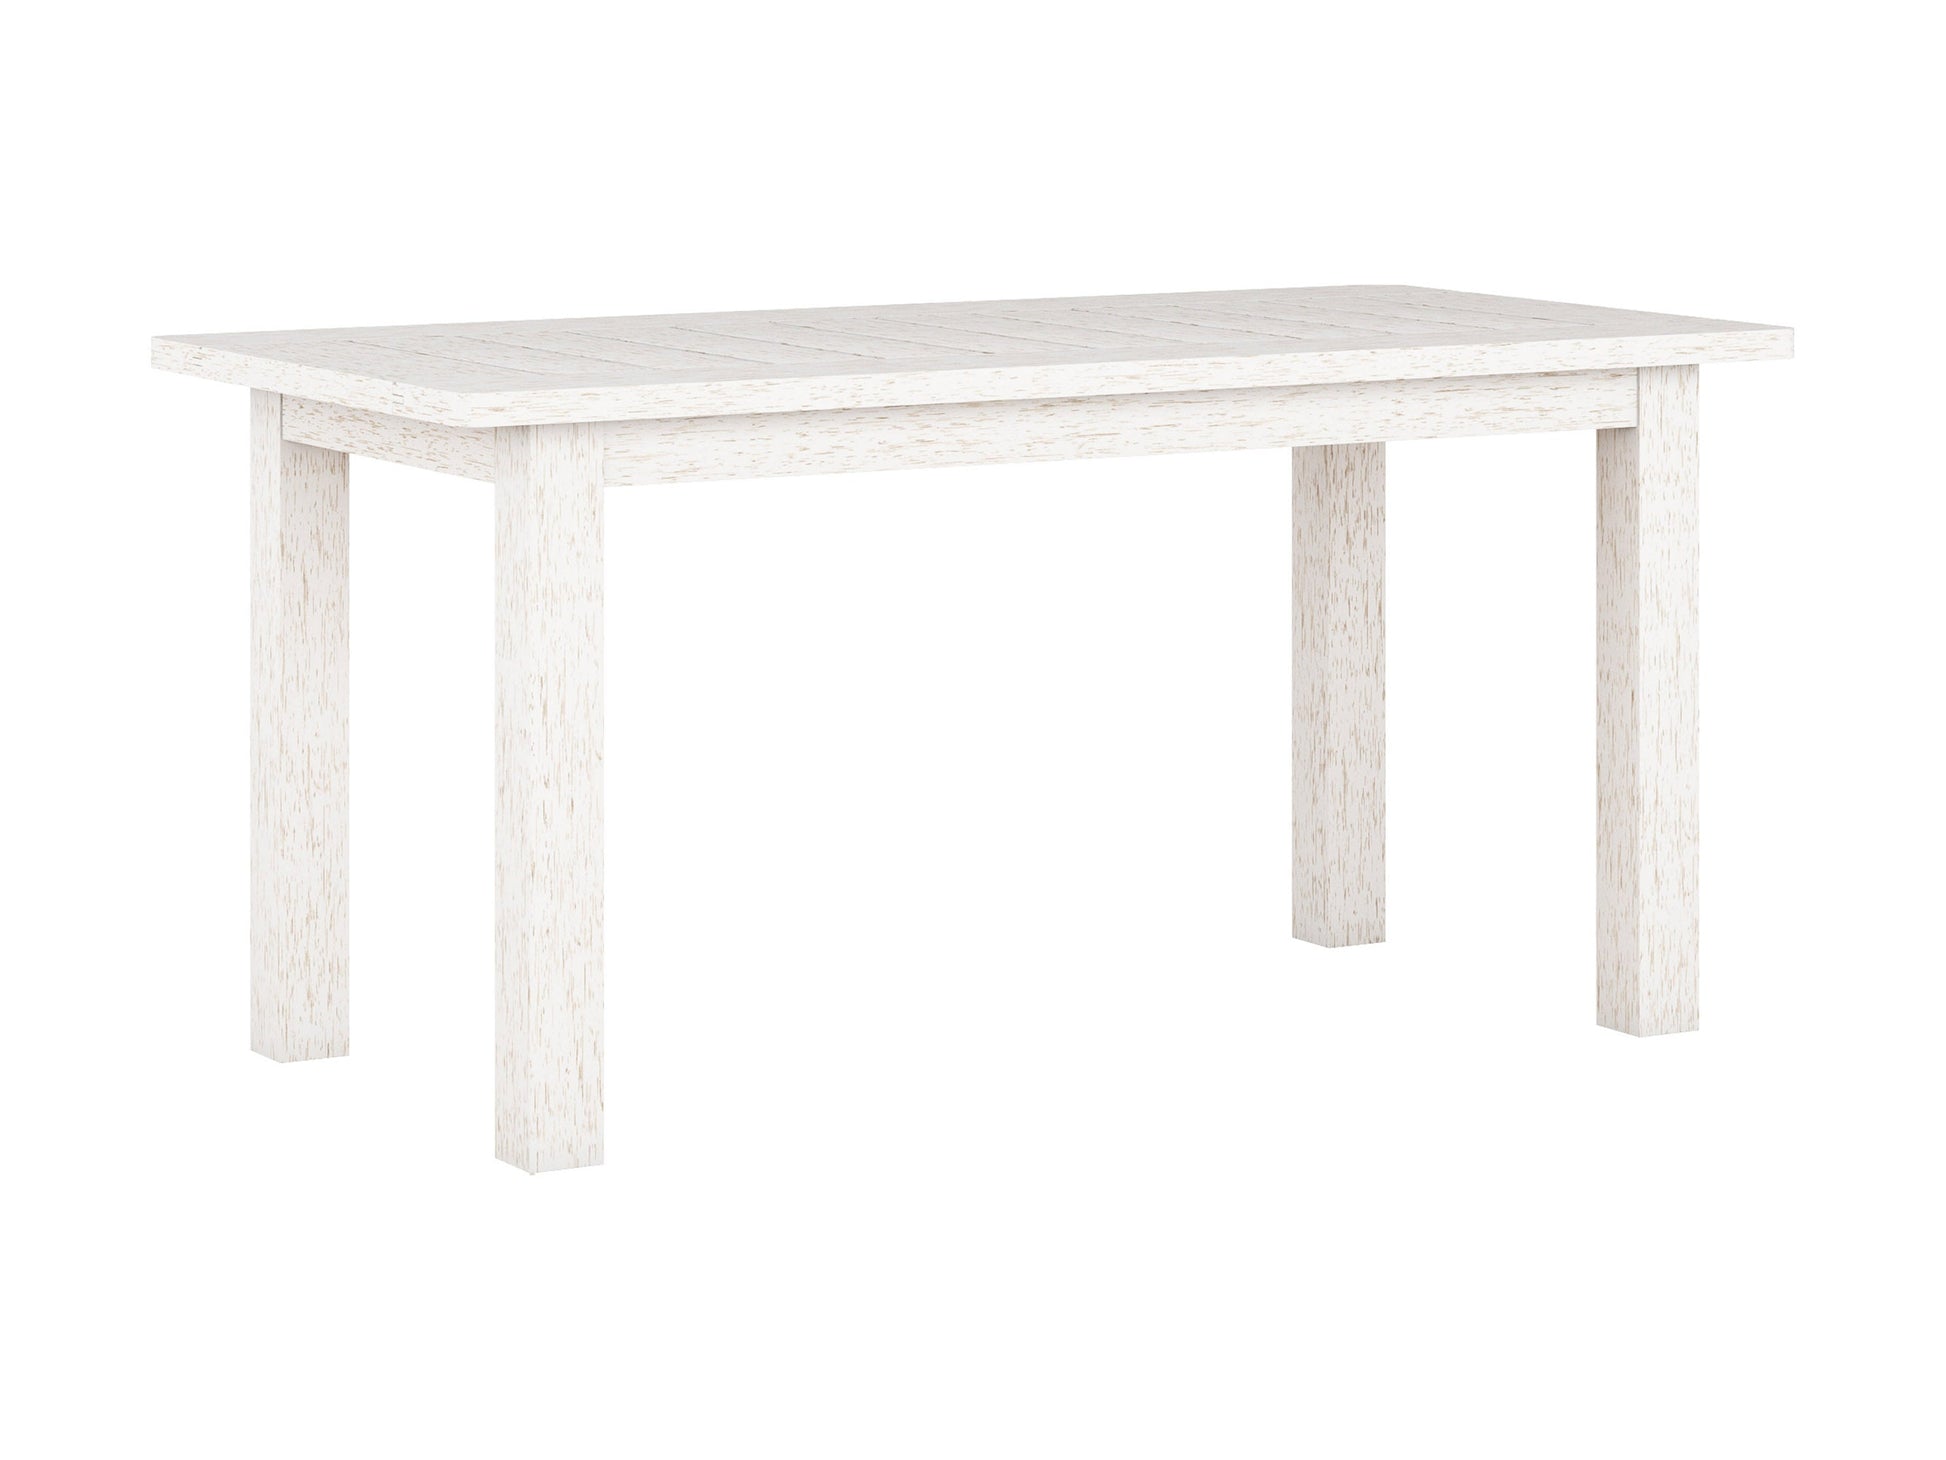 Miramar Washed White Wooden Patio Set, 4pc Miramar Collection detail image by CorLiving#color_miramar-washed-white